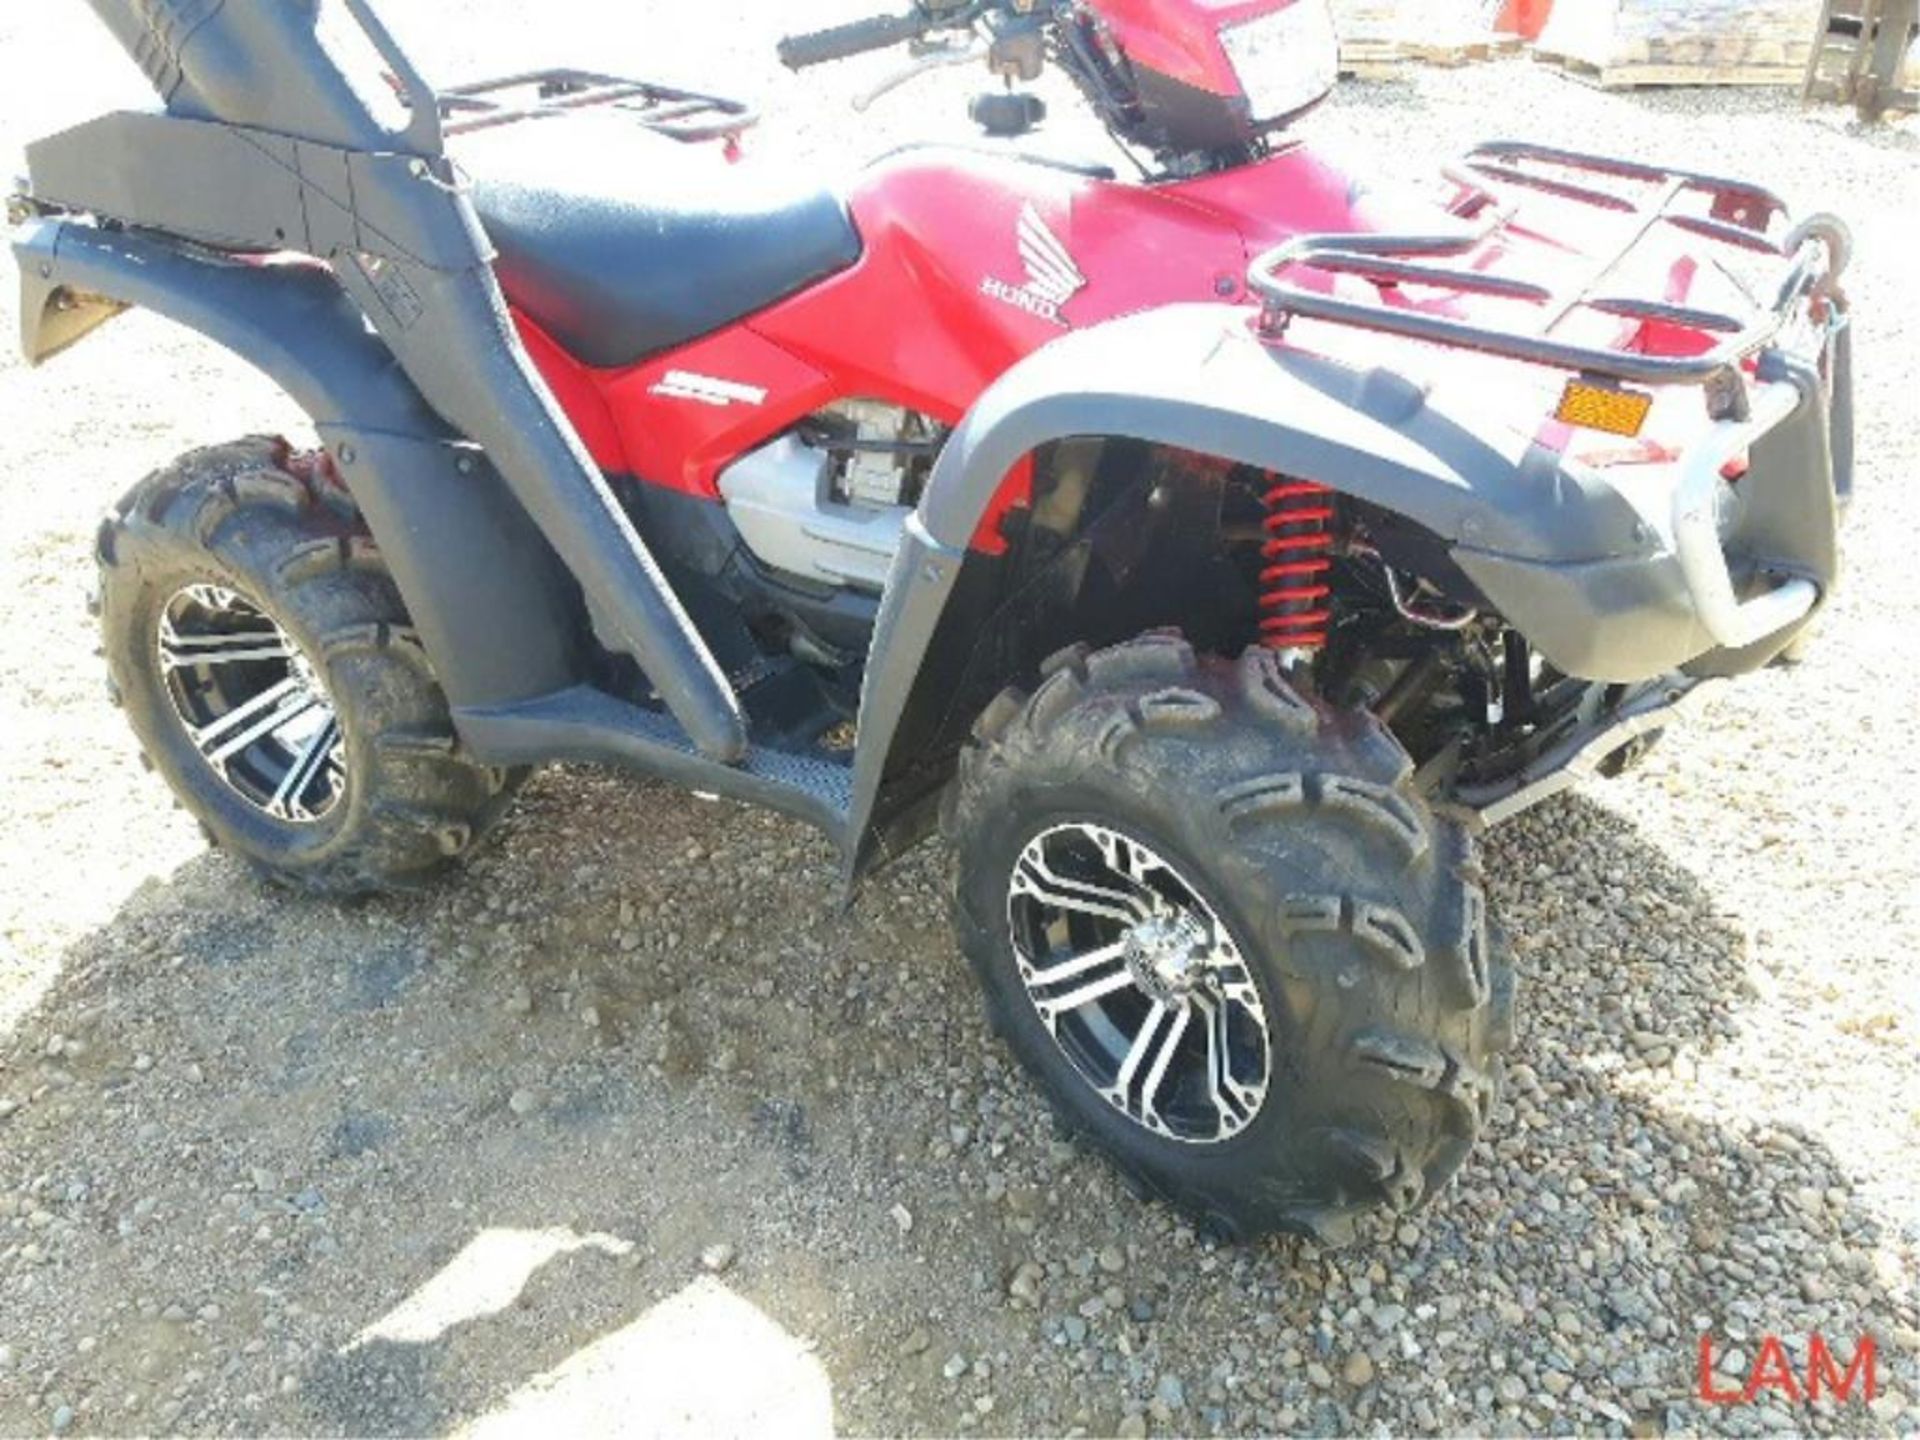 2006 Honda 500 Rubicon Quad VIN 1HFTE265264503369 4893km, 428hrs, c/w Gun Boot & Winch. Blade to fit - Image 2 of 10